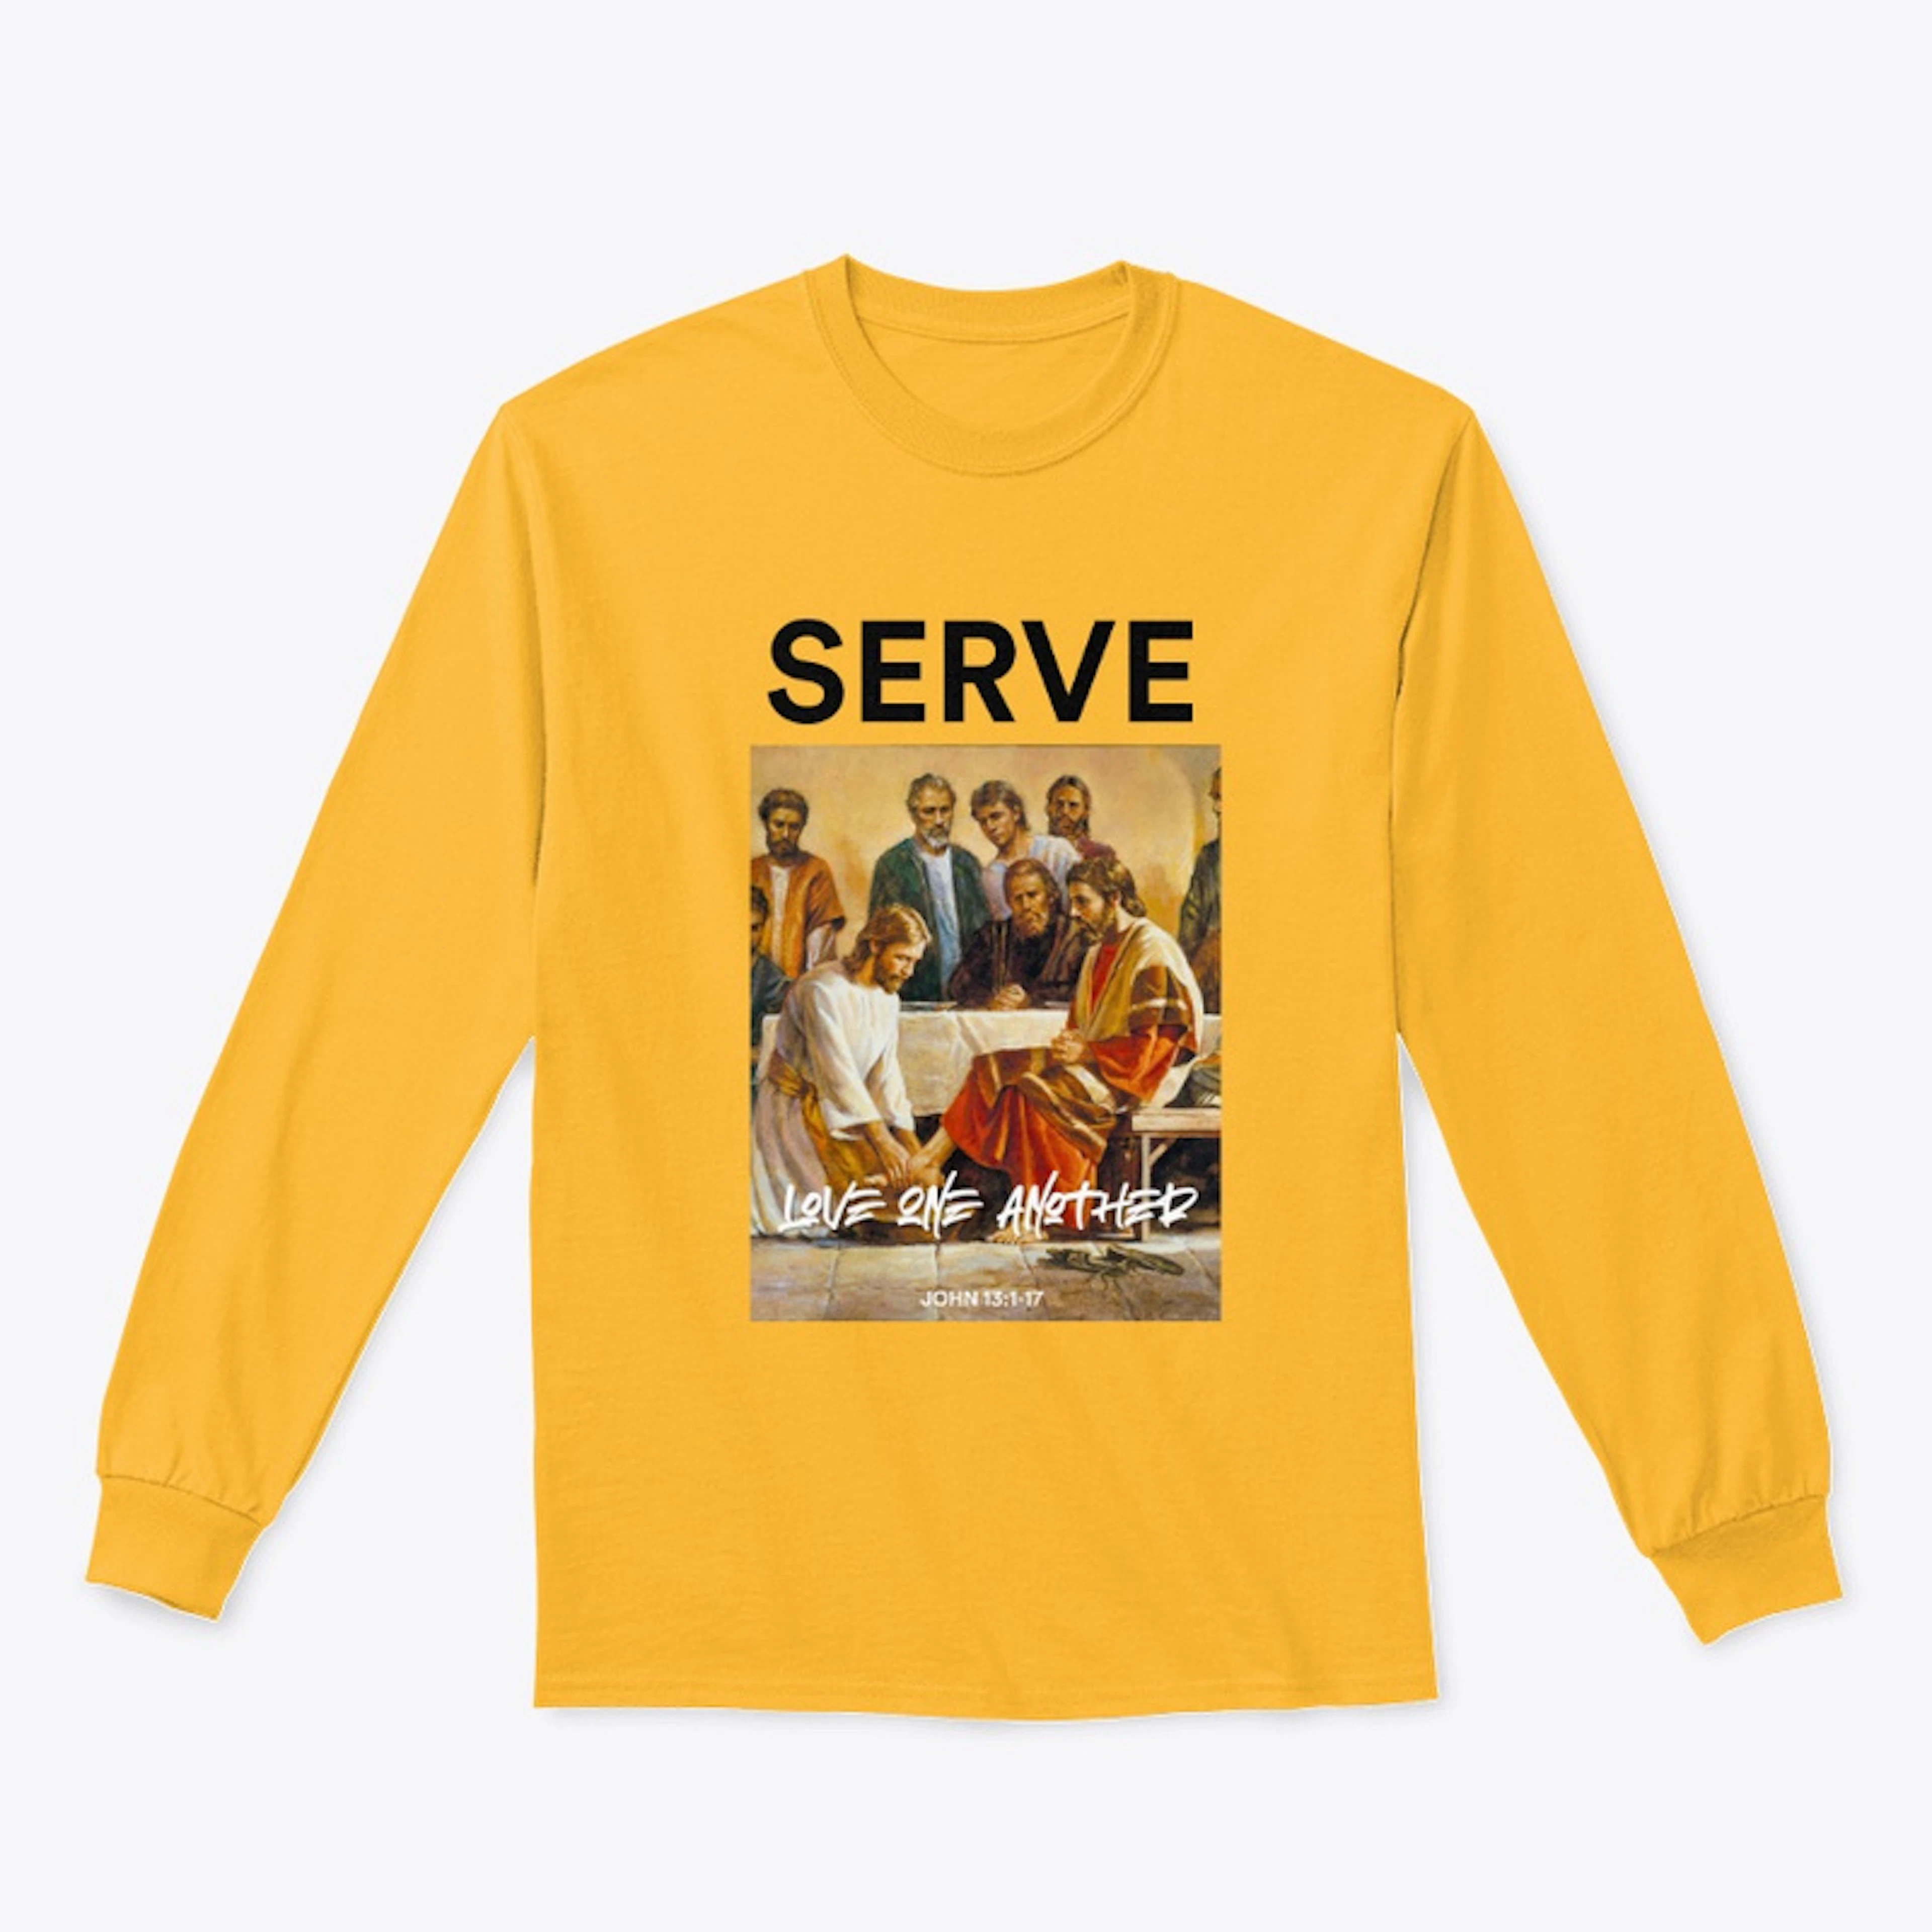 "SERVE: Love One Another" Longsleeve Tee